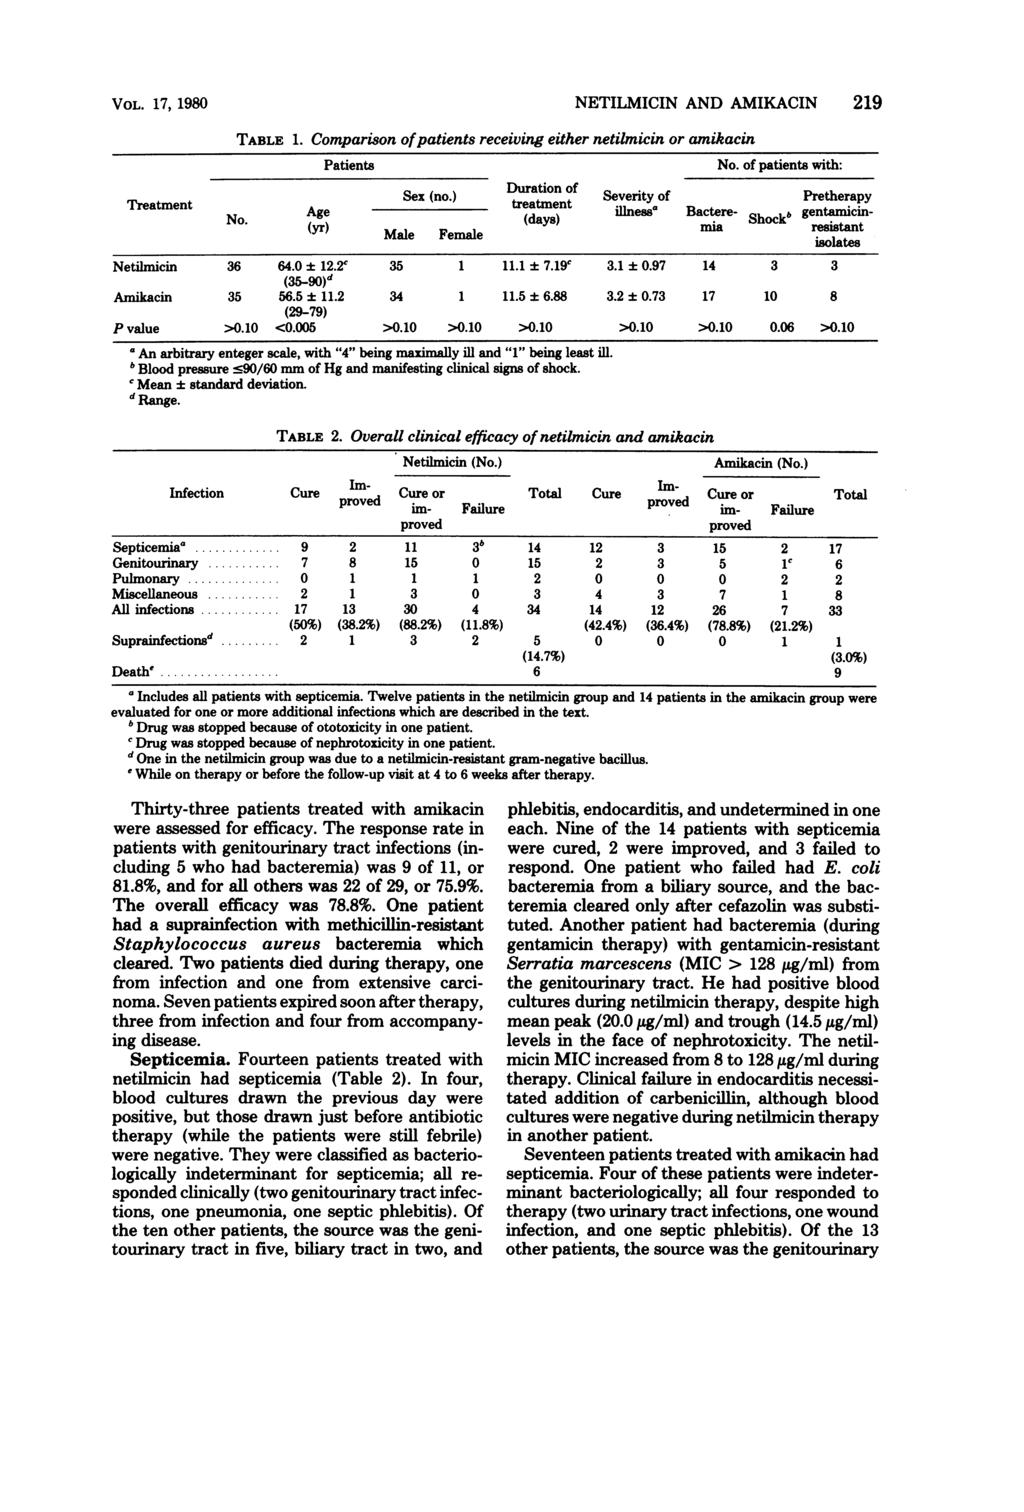 VOL. 17, 1980 TABLE 1. NETILMICIN AND AMIKACIN 219 Comparison ofpatients receiving either netilmicin or amikacin Patients No. of patients with: Treatm Sex (no.